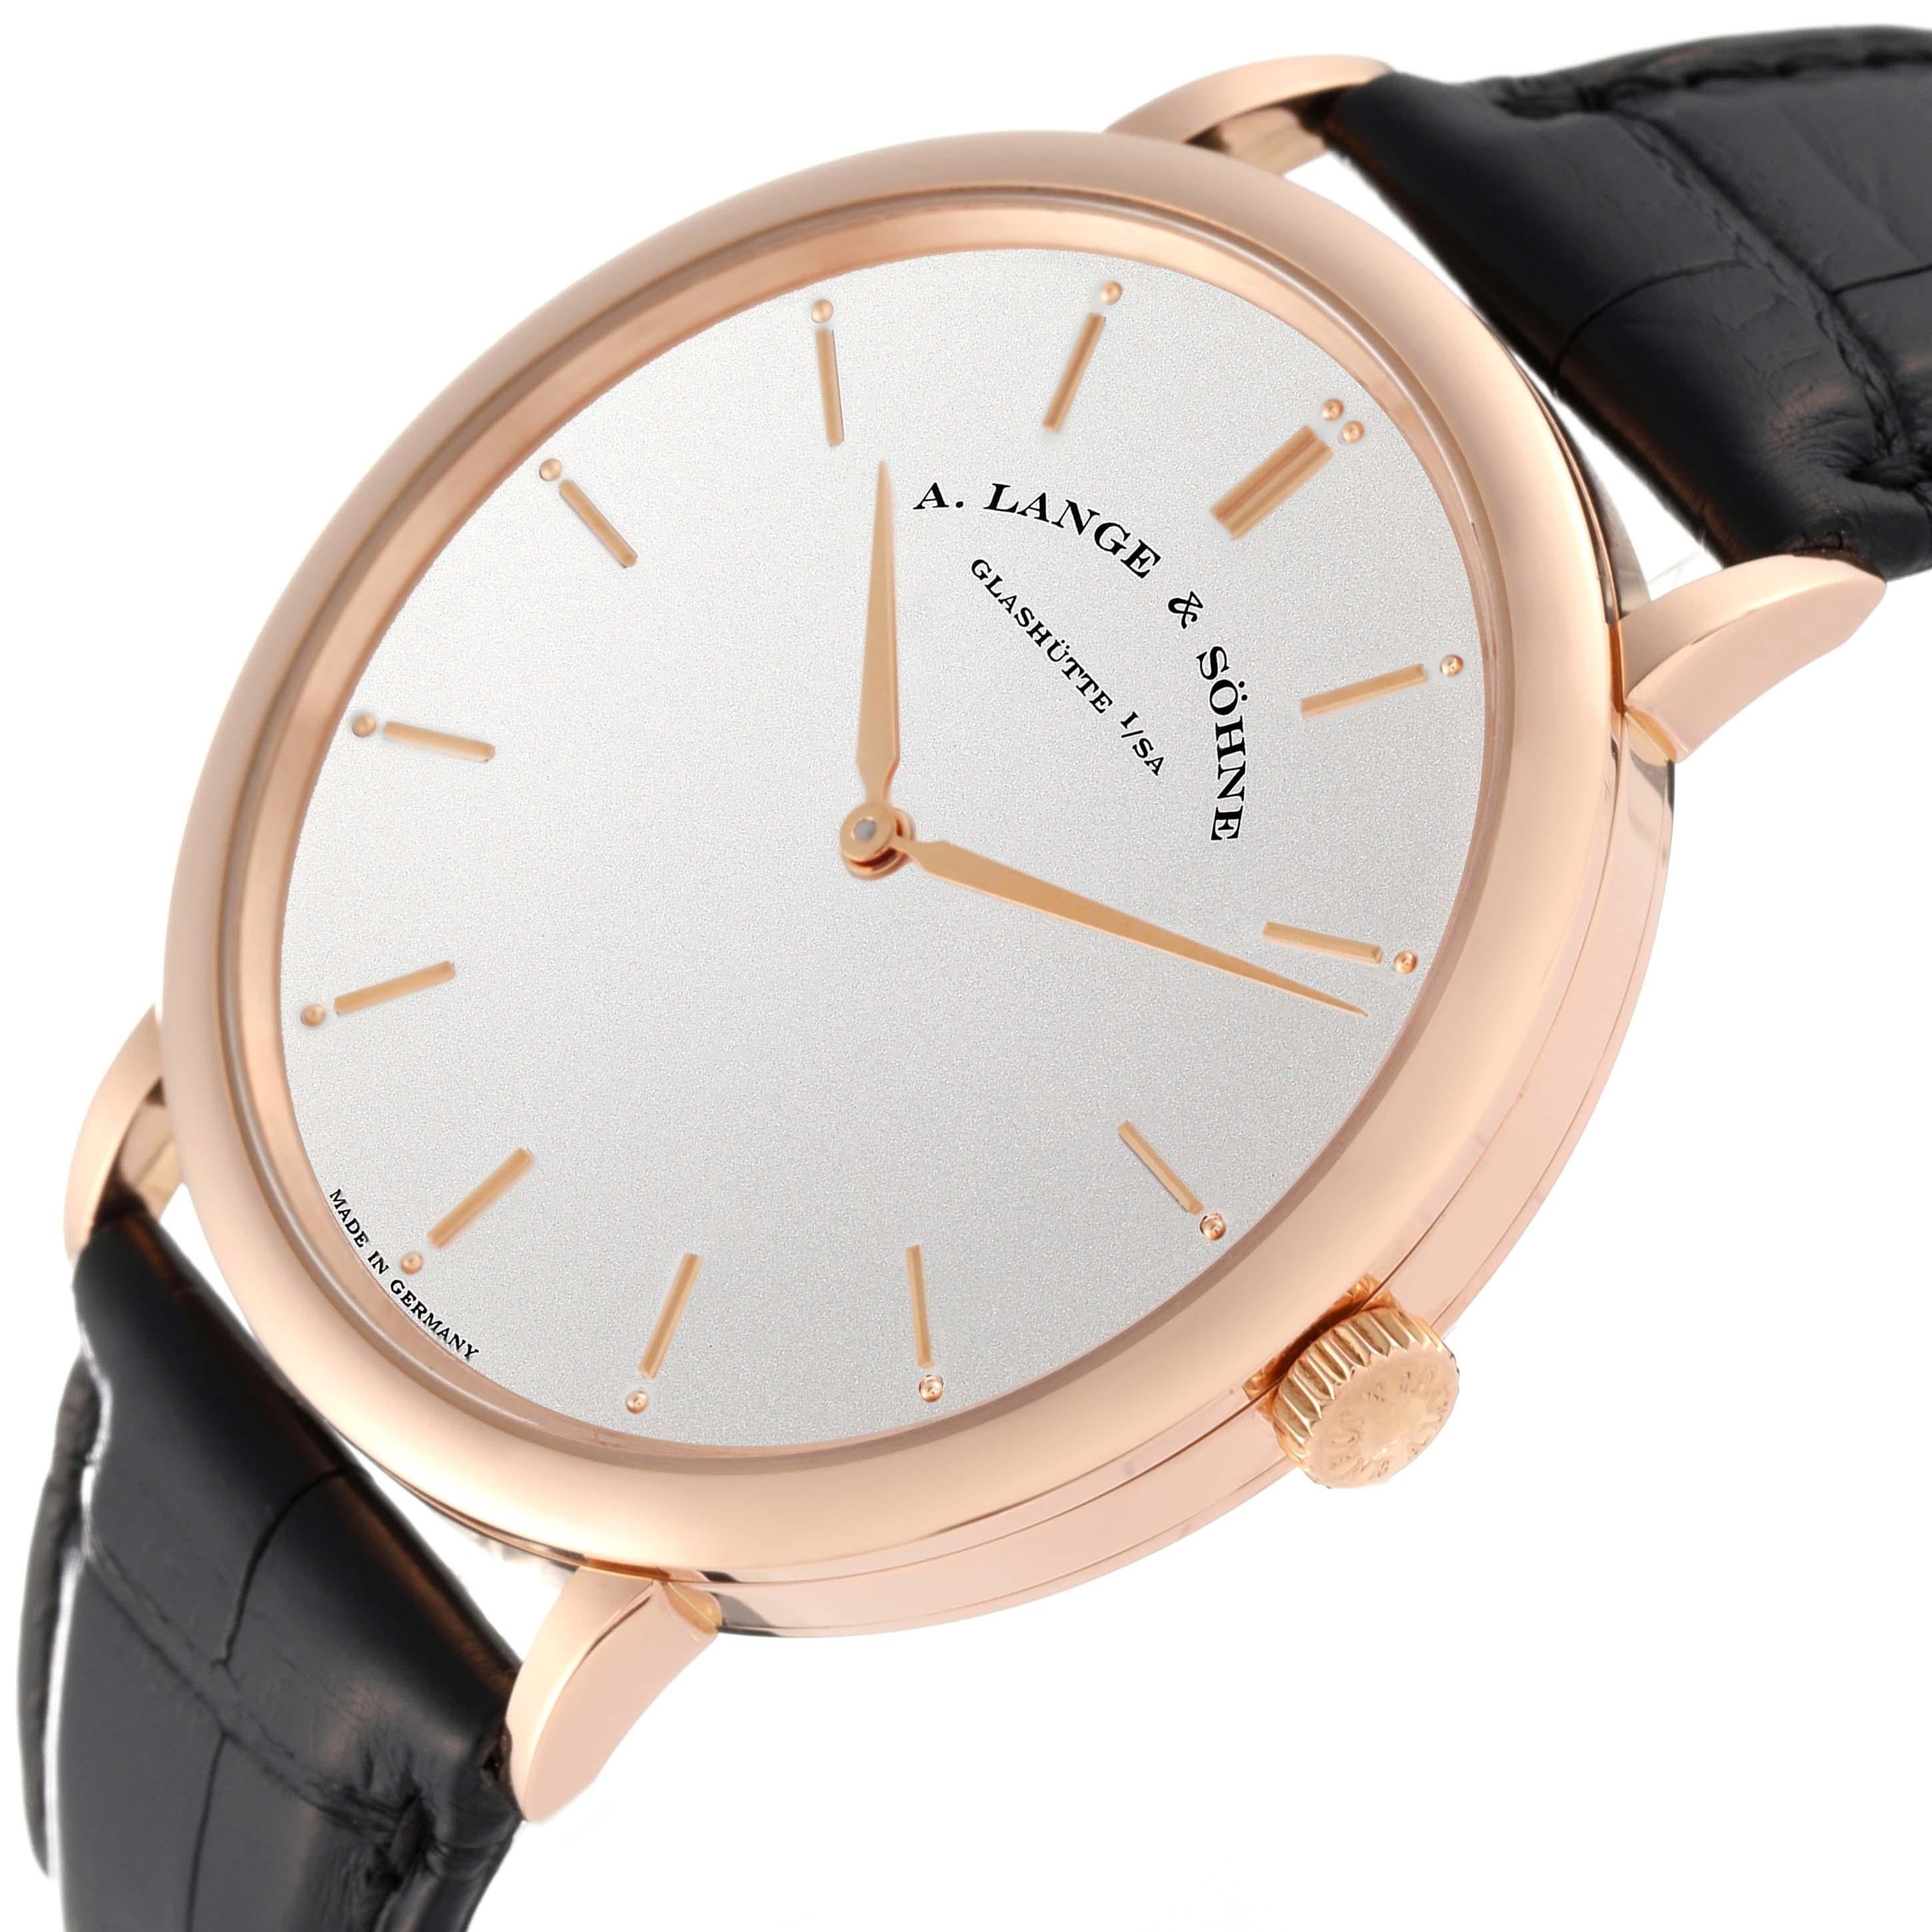 Men's A. Lange and Sohne Saxonia Thin 40mm Rose Gold Mens Watch 211.032 For Sale